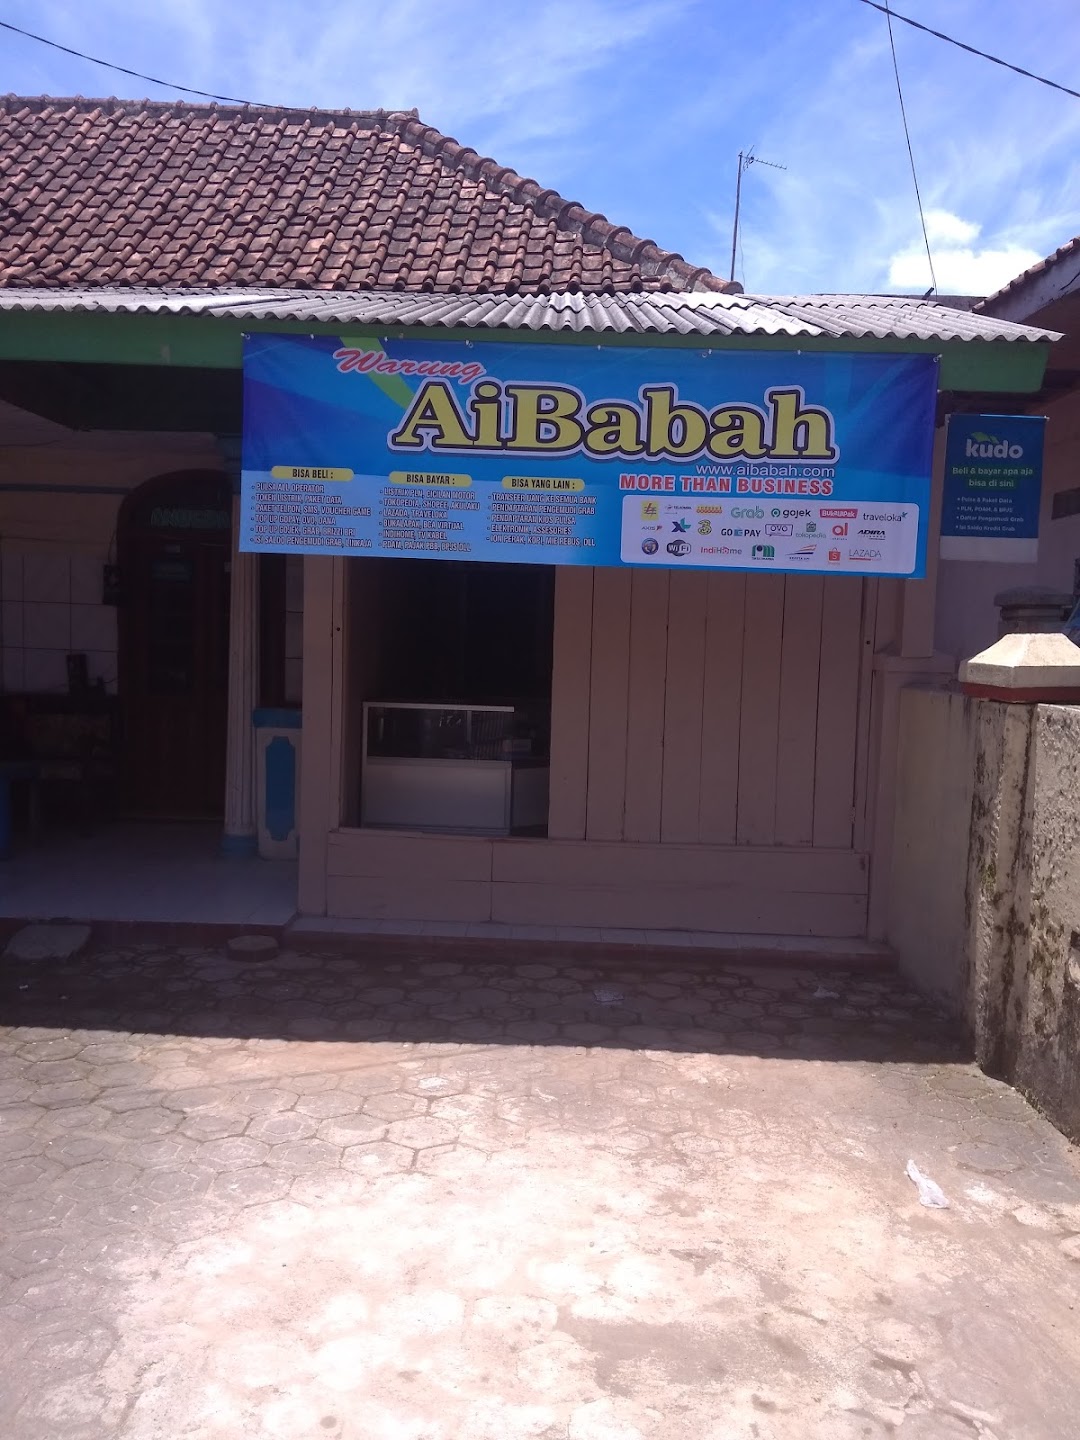 AiBabah